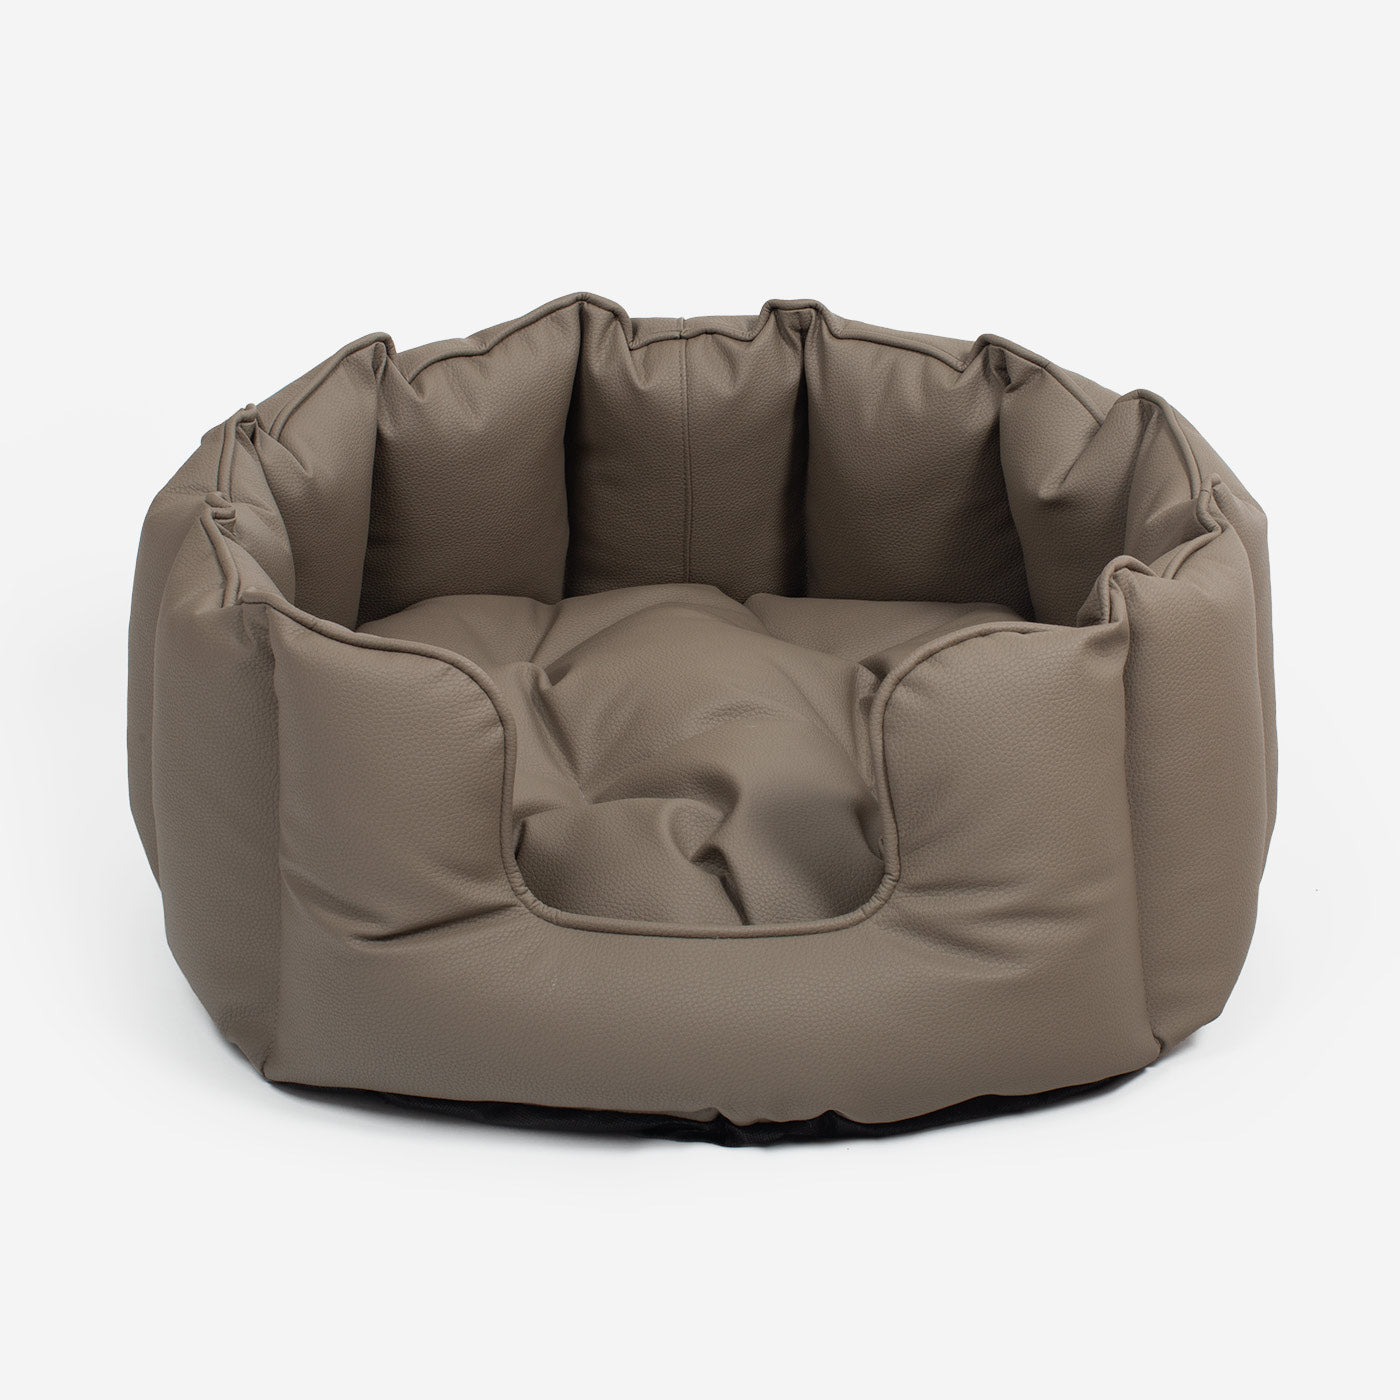 [colour:camel] Luxury Handmade High Wall in Rhino Tough Faux Leather, in Camel, Perfect For Your Pets Nap Time! Available To Personalise at Lords & Labradors